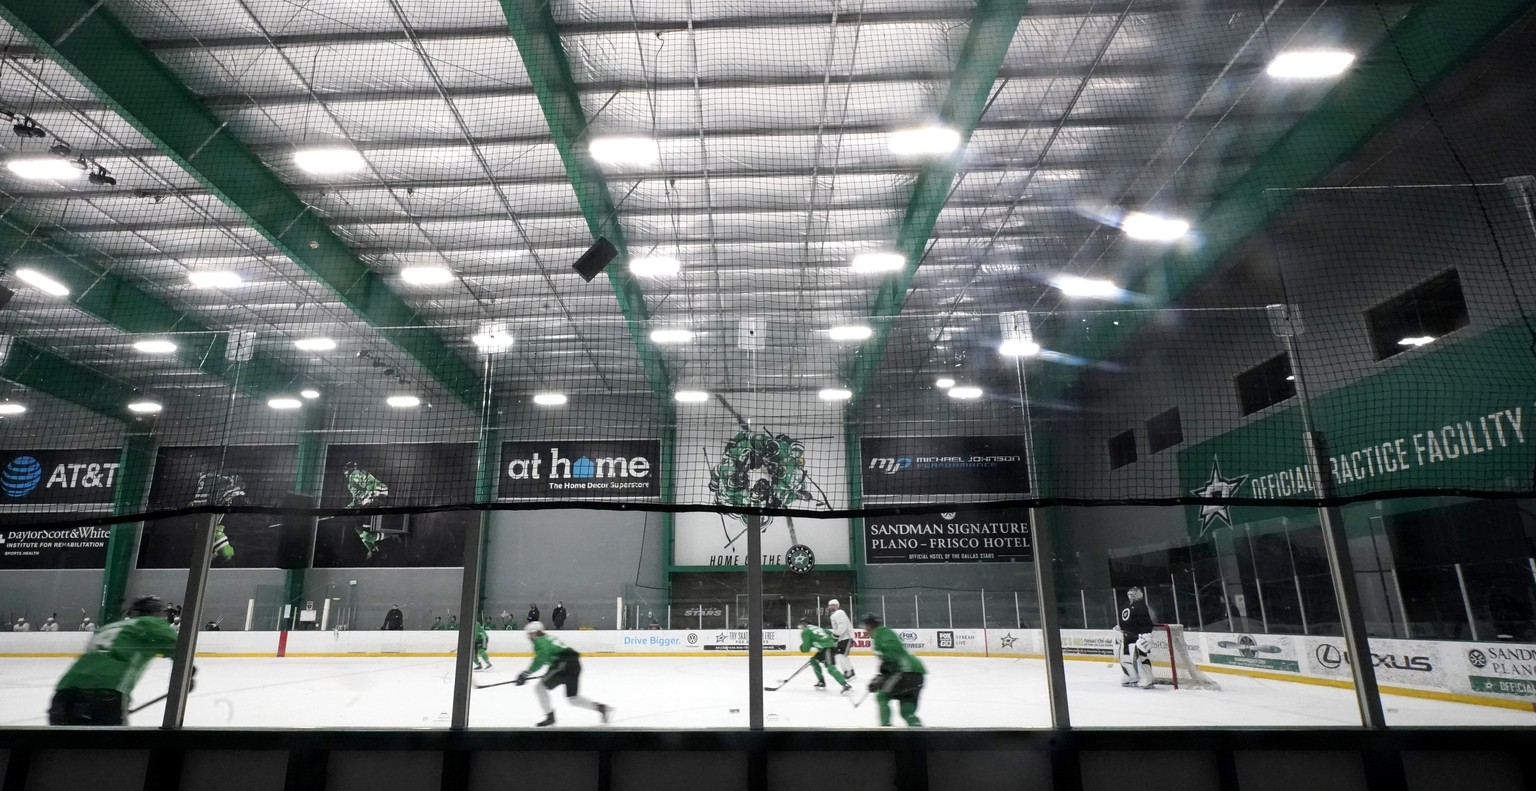 The Dallas Stars run drills during NHL hockey training camp practice Wednesday, Jan. 6, 2021, in Frisco, Texas. (AP Photo/LM Otero)